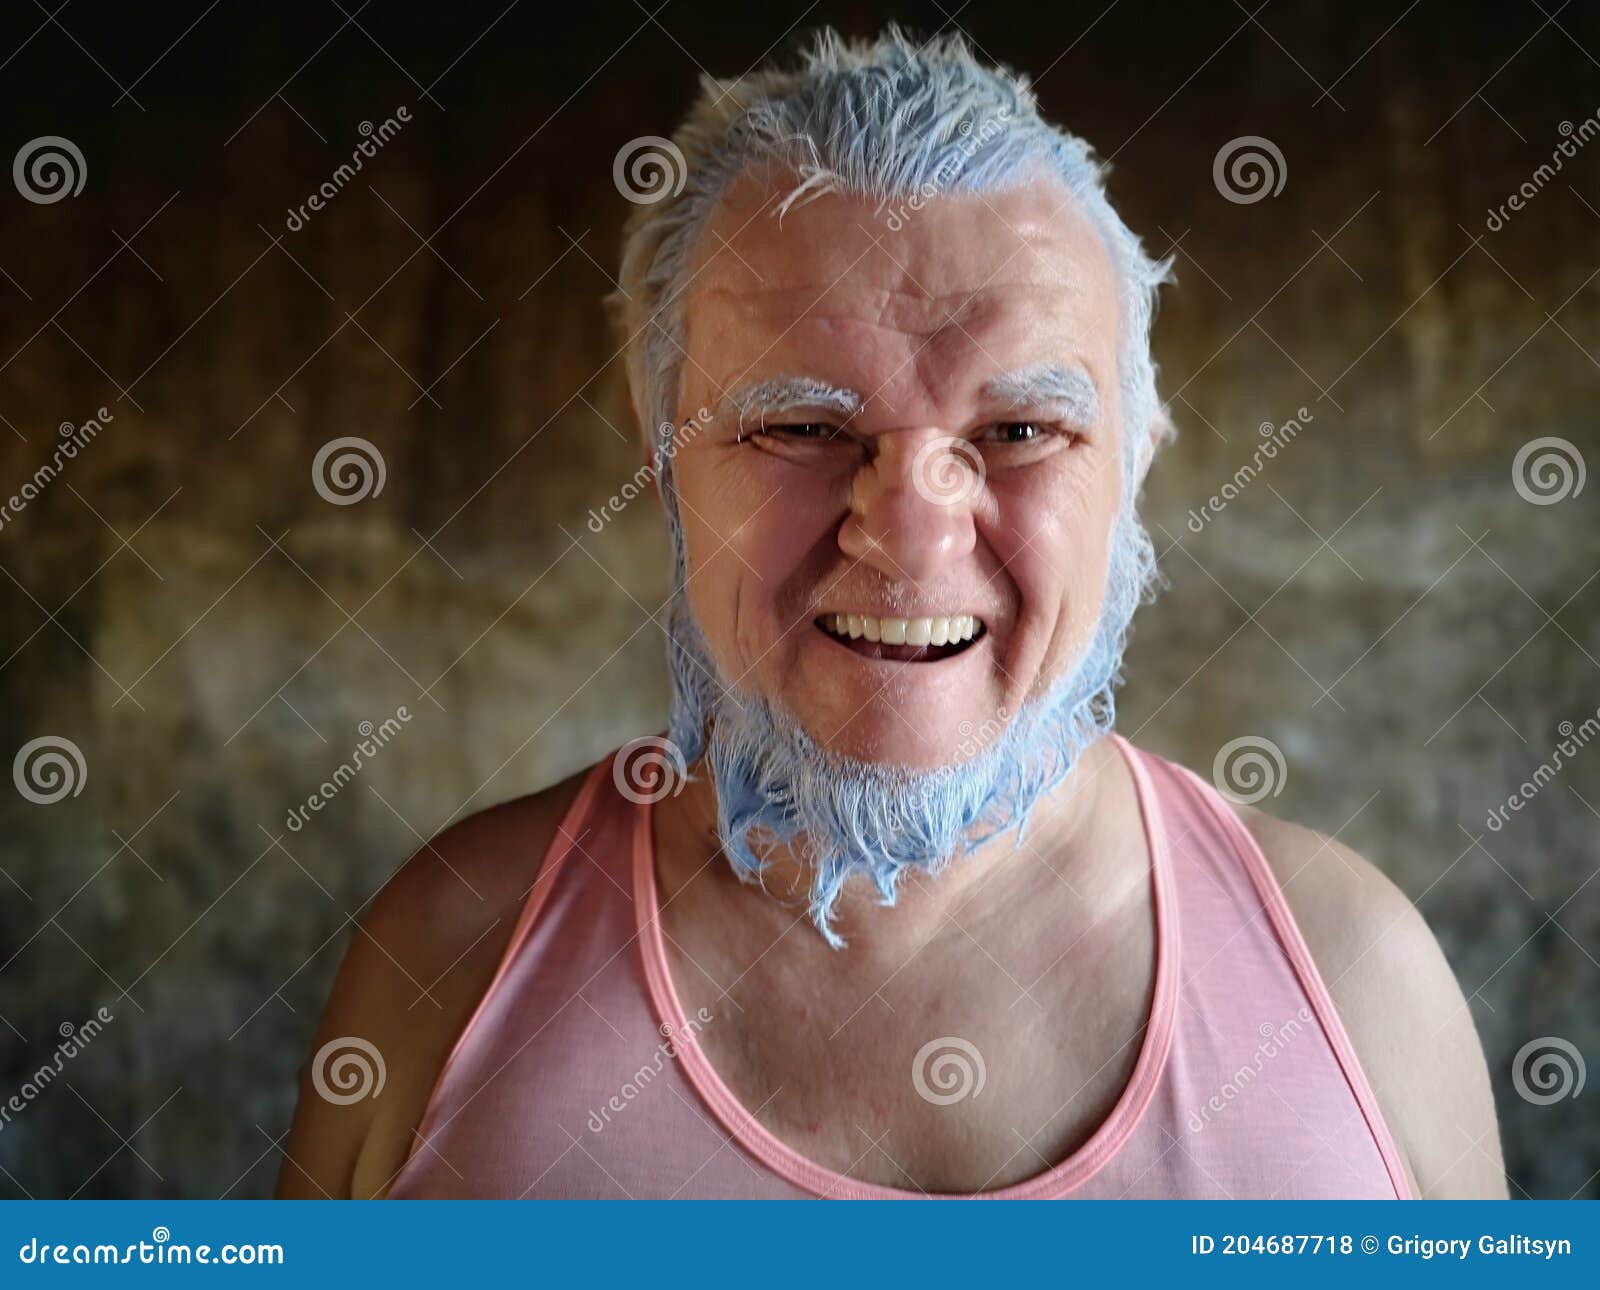 Man with blue hair and beard - wide 1